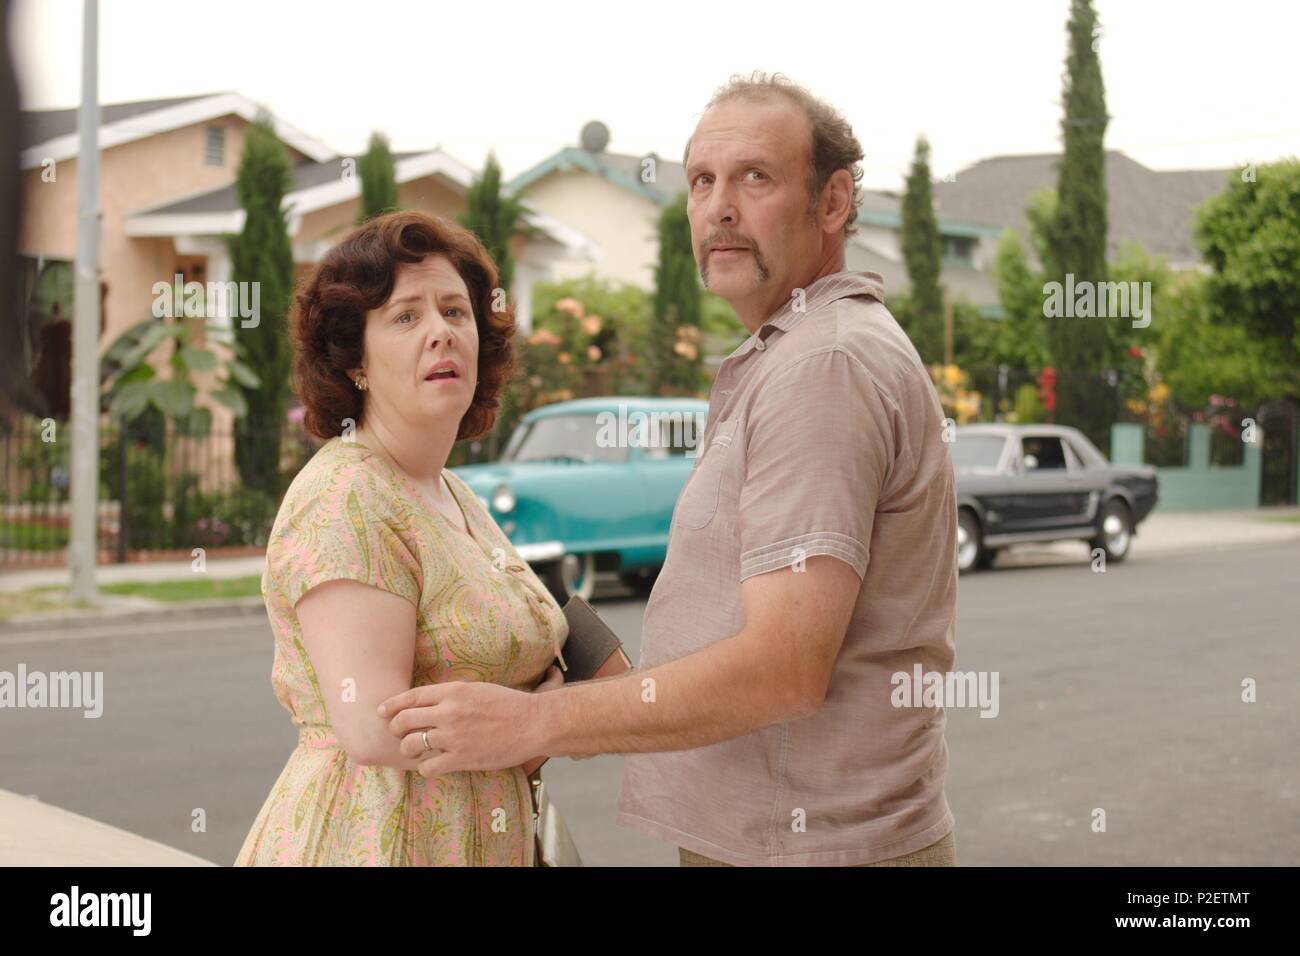 Original Film Title: AN AMERICAN CRIME. English Title: AN AMERICAN CRIME.  Film Director: TOMMY O&#39;HAVER. Year: 2007. Stars: ROMY ROSEMONT; NICK SEARCY.  Credit: FIRST LOOK / Album Stock Photo - Alamy